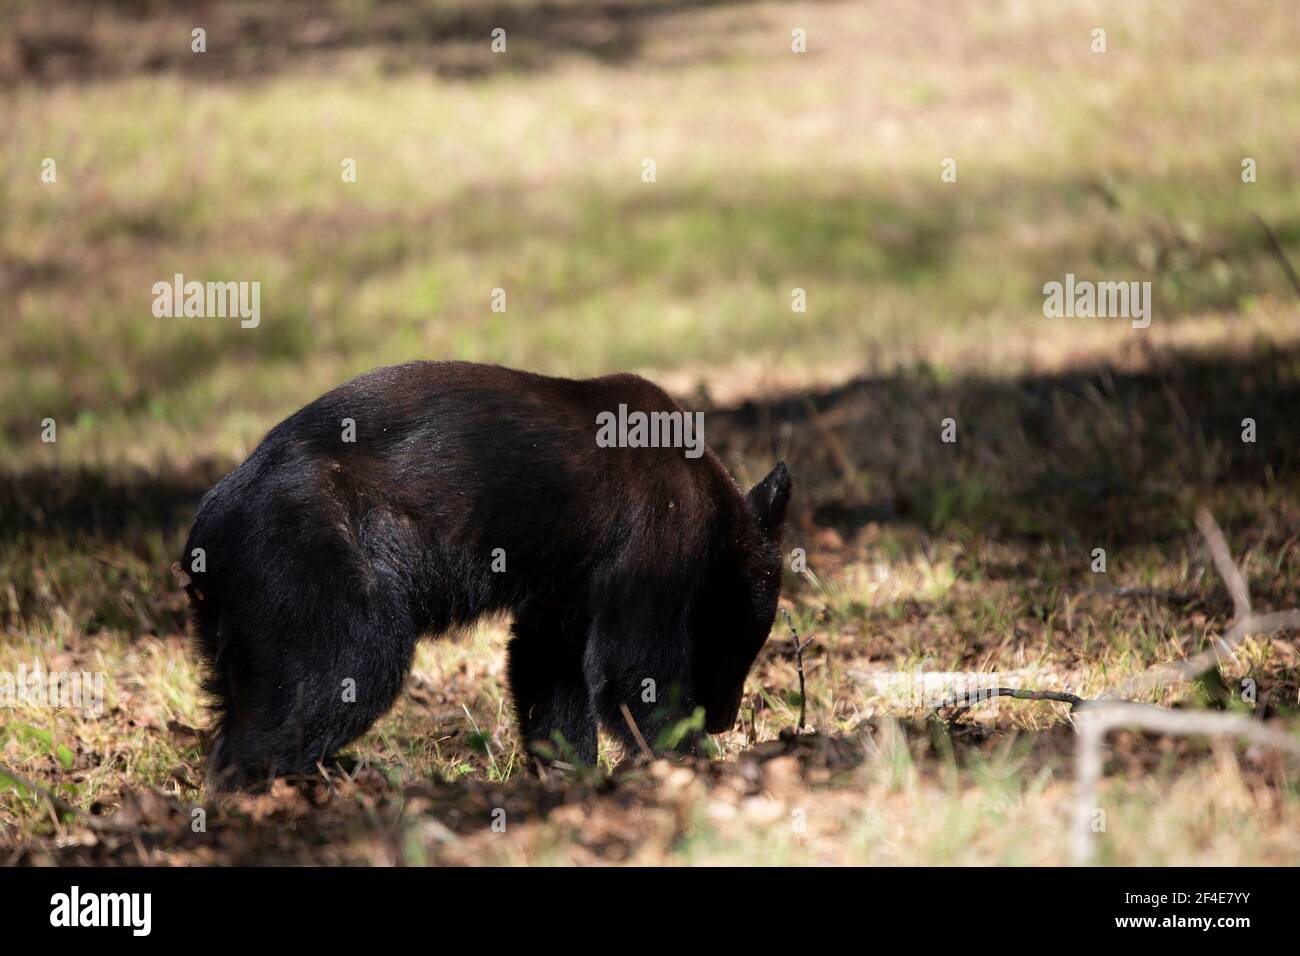 Young black bear (Ursus americanus) yearling foraging for insects and plants on the ground Stock Photo